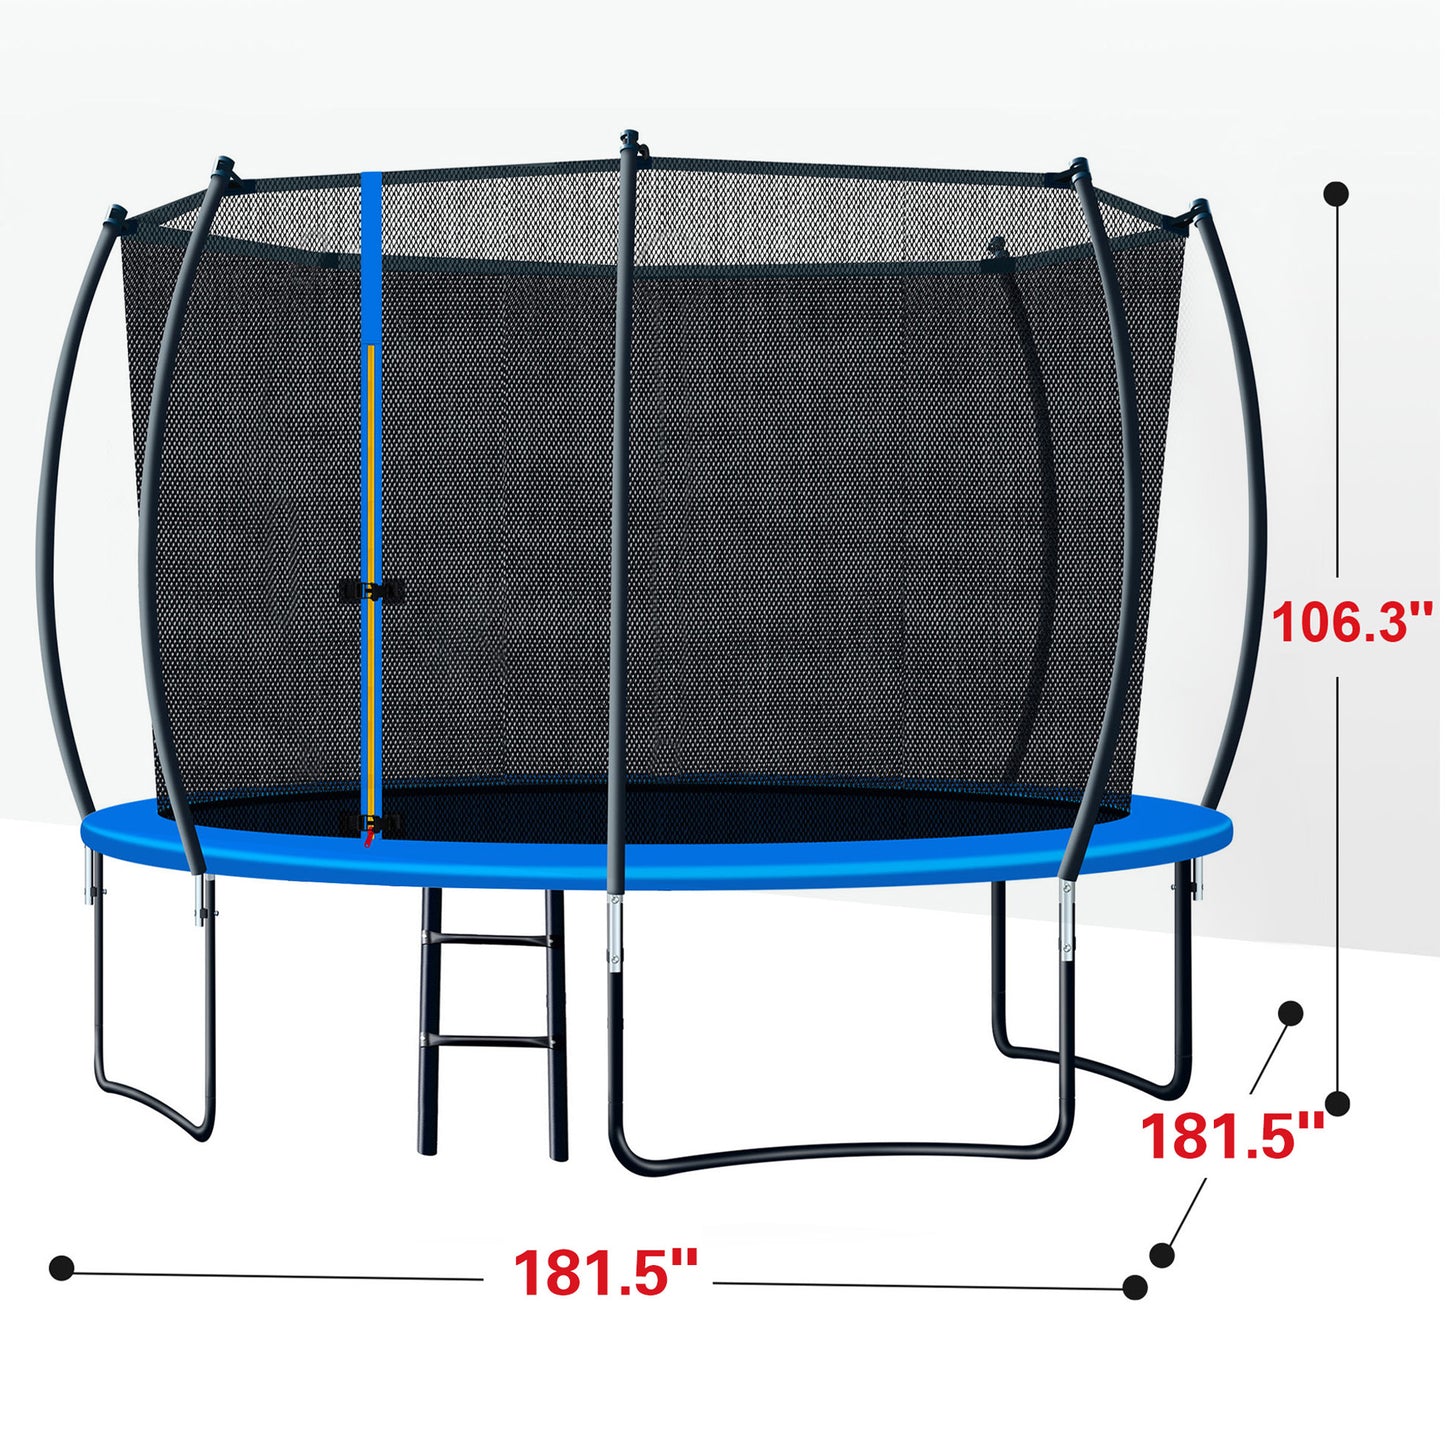 Soges 1400LBS 14FT Trampoline for Kids and Adults,Trampoline with Enclosure,Recreational Trampoline with Ladder, Outdoor Heavy Duty Trampoline ASTM Approved Round Trampoline Capacity for 6-7 Kids